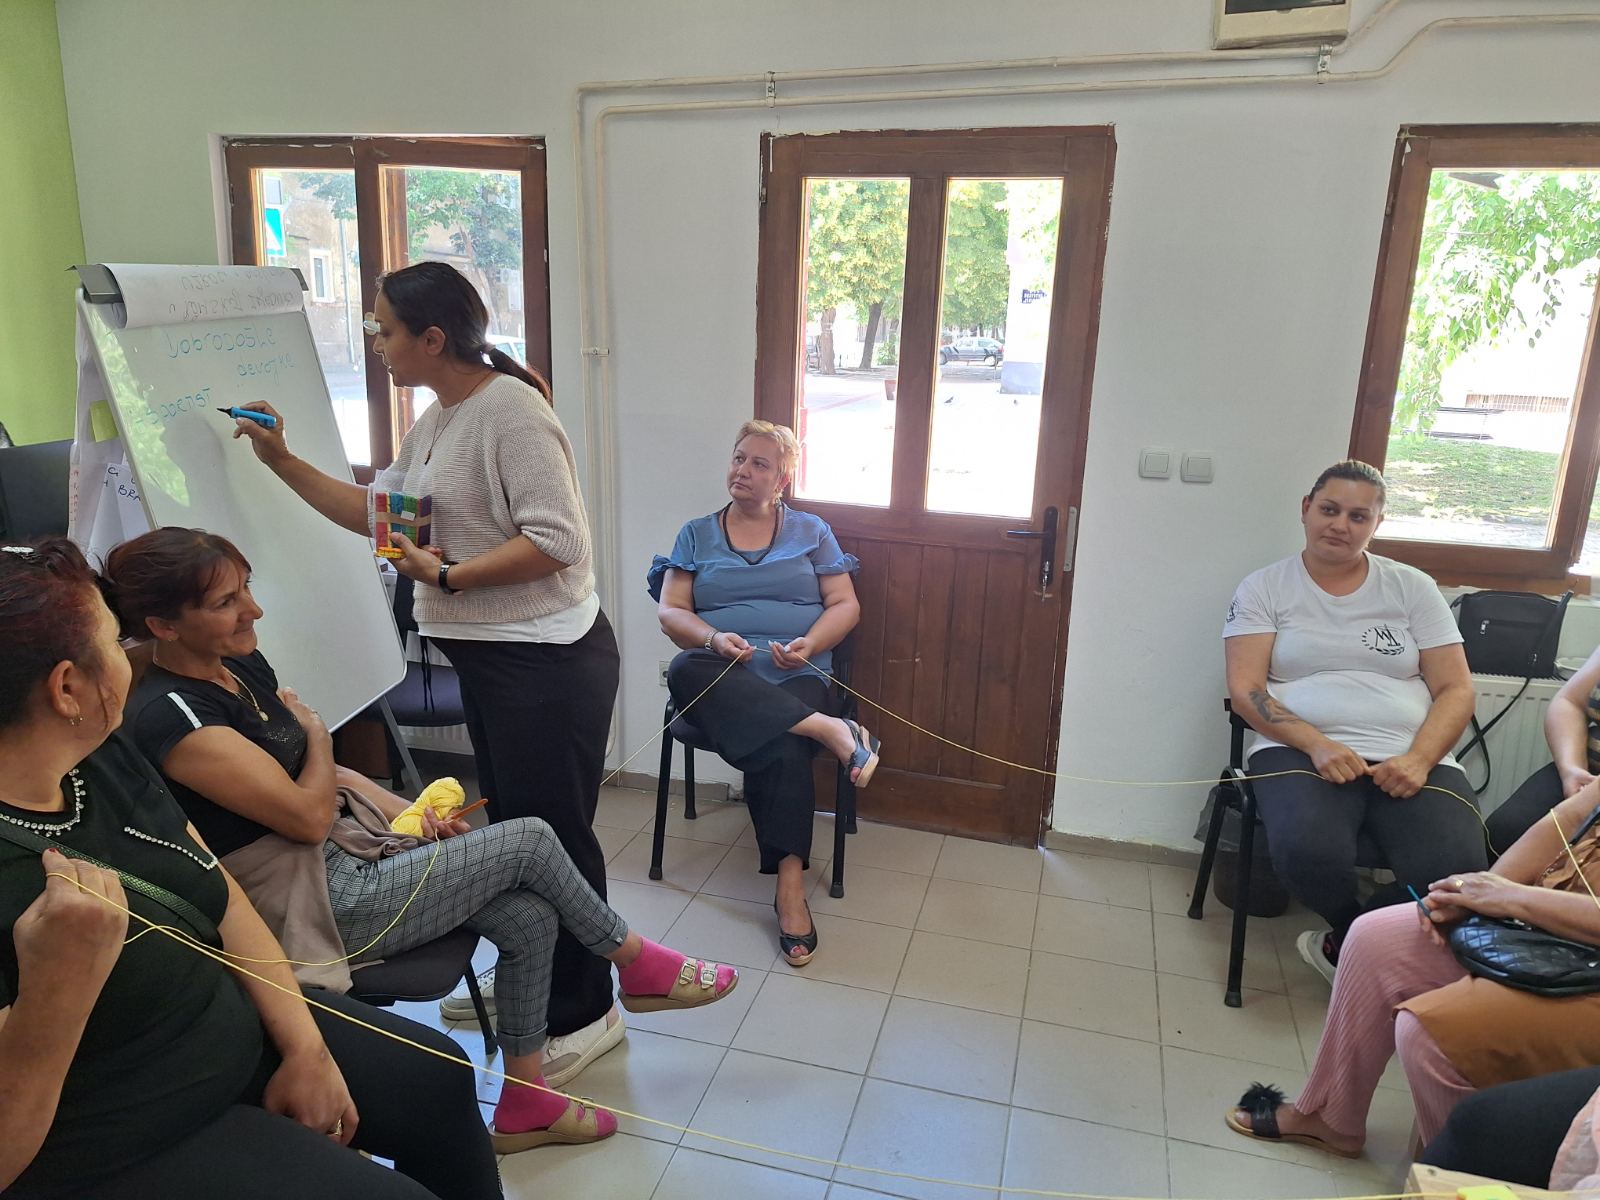 The first phase of mapping the heritage of women emancipation in Roma communities was carried out